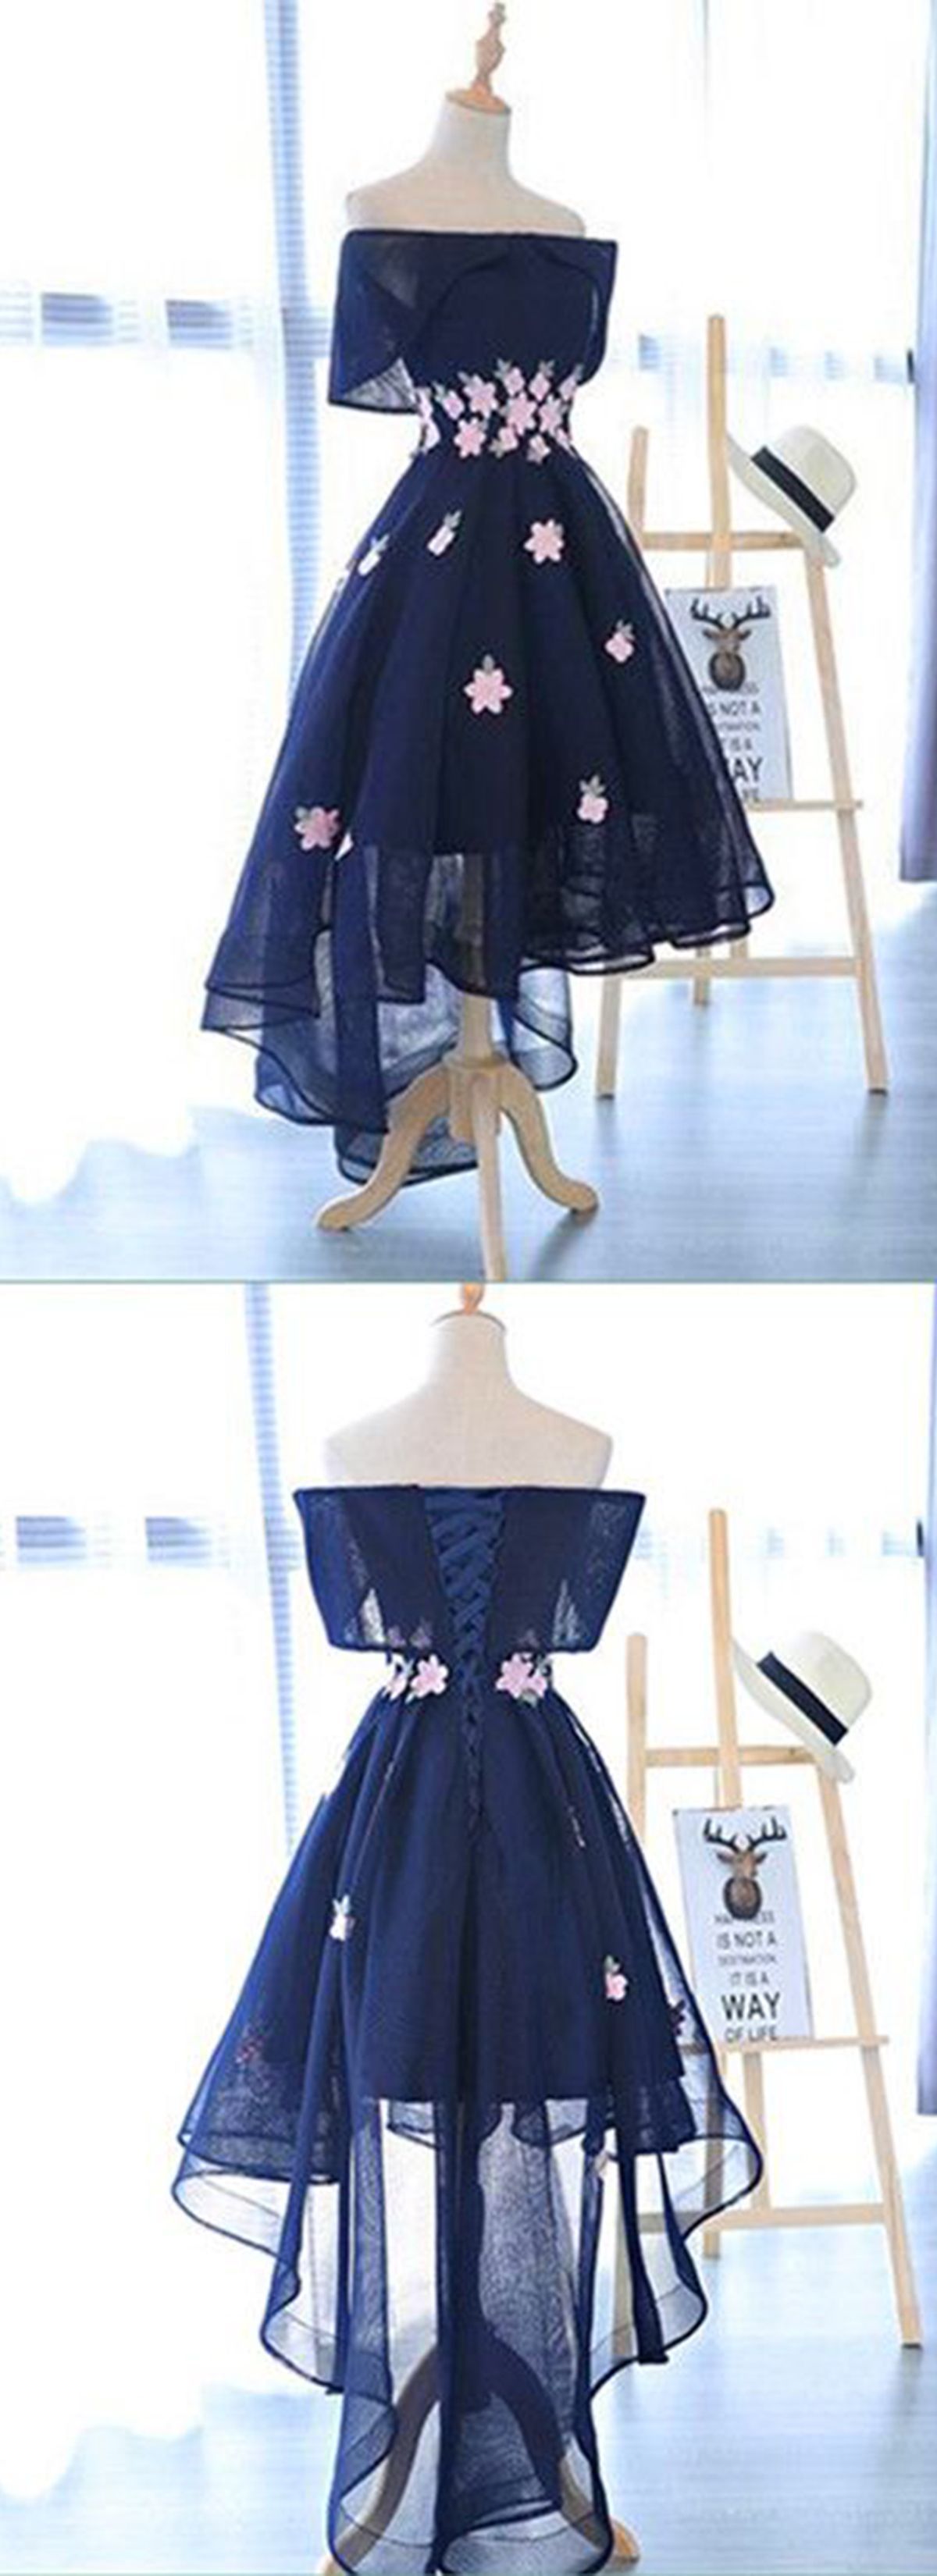 Navy blue chiffon off shoulder high low homecoming dress, party dress from Girlsprom -   17 dress For Teens party ideas